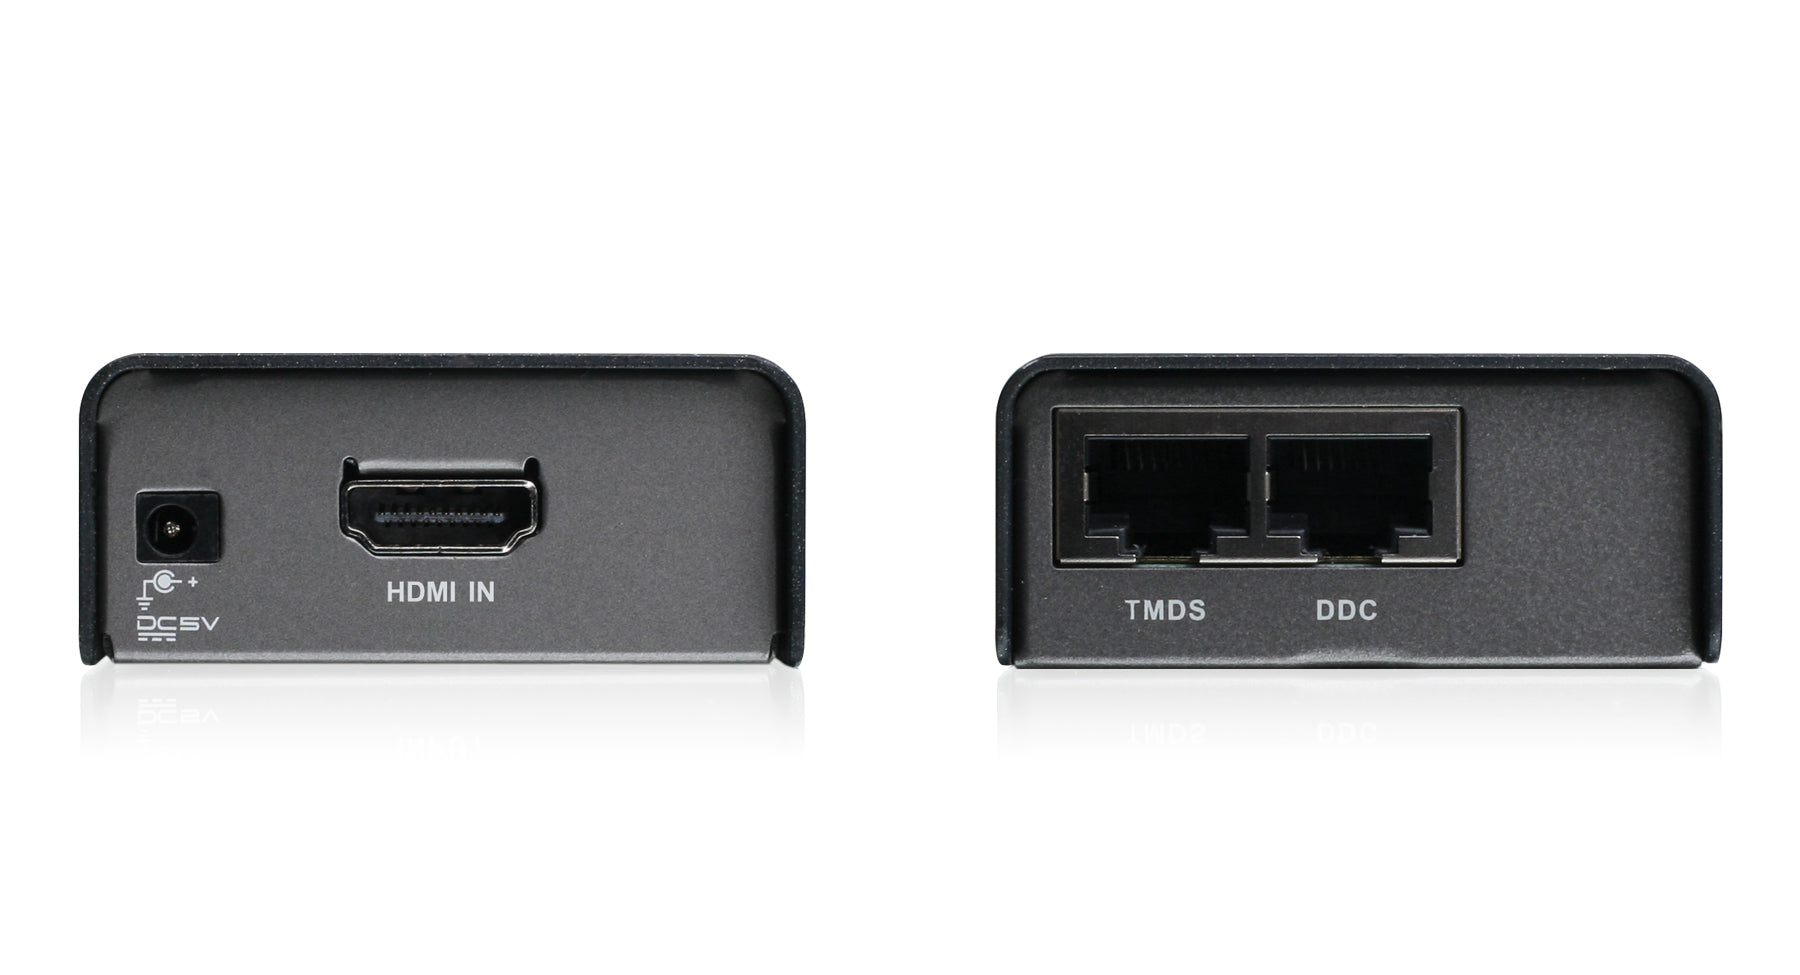 HD Audio / Video CAT5e/6 Extender, with 1 HDMI Input - 1 HDMI Output